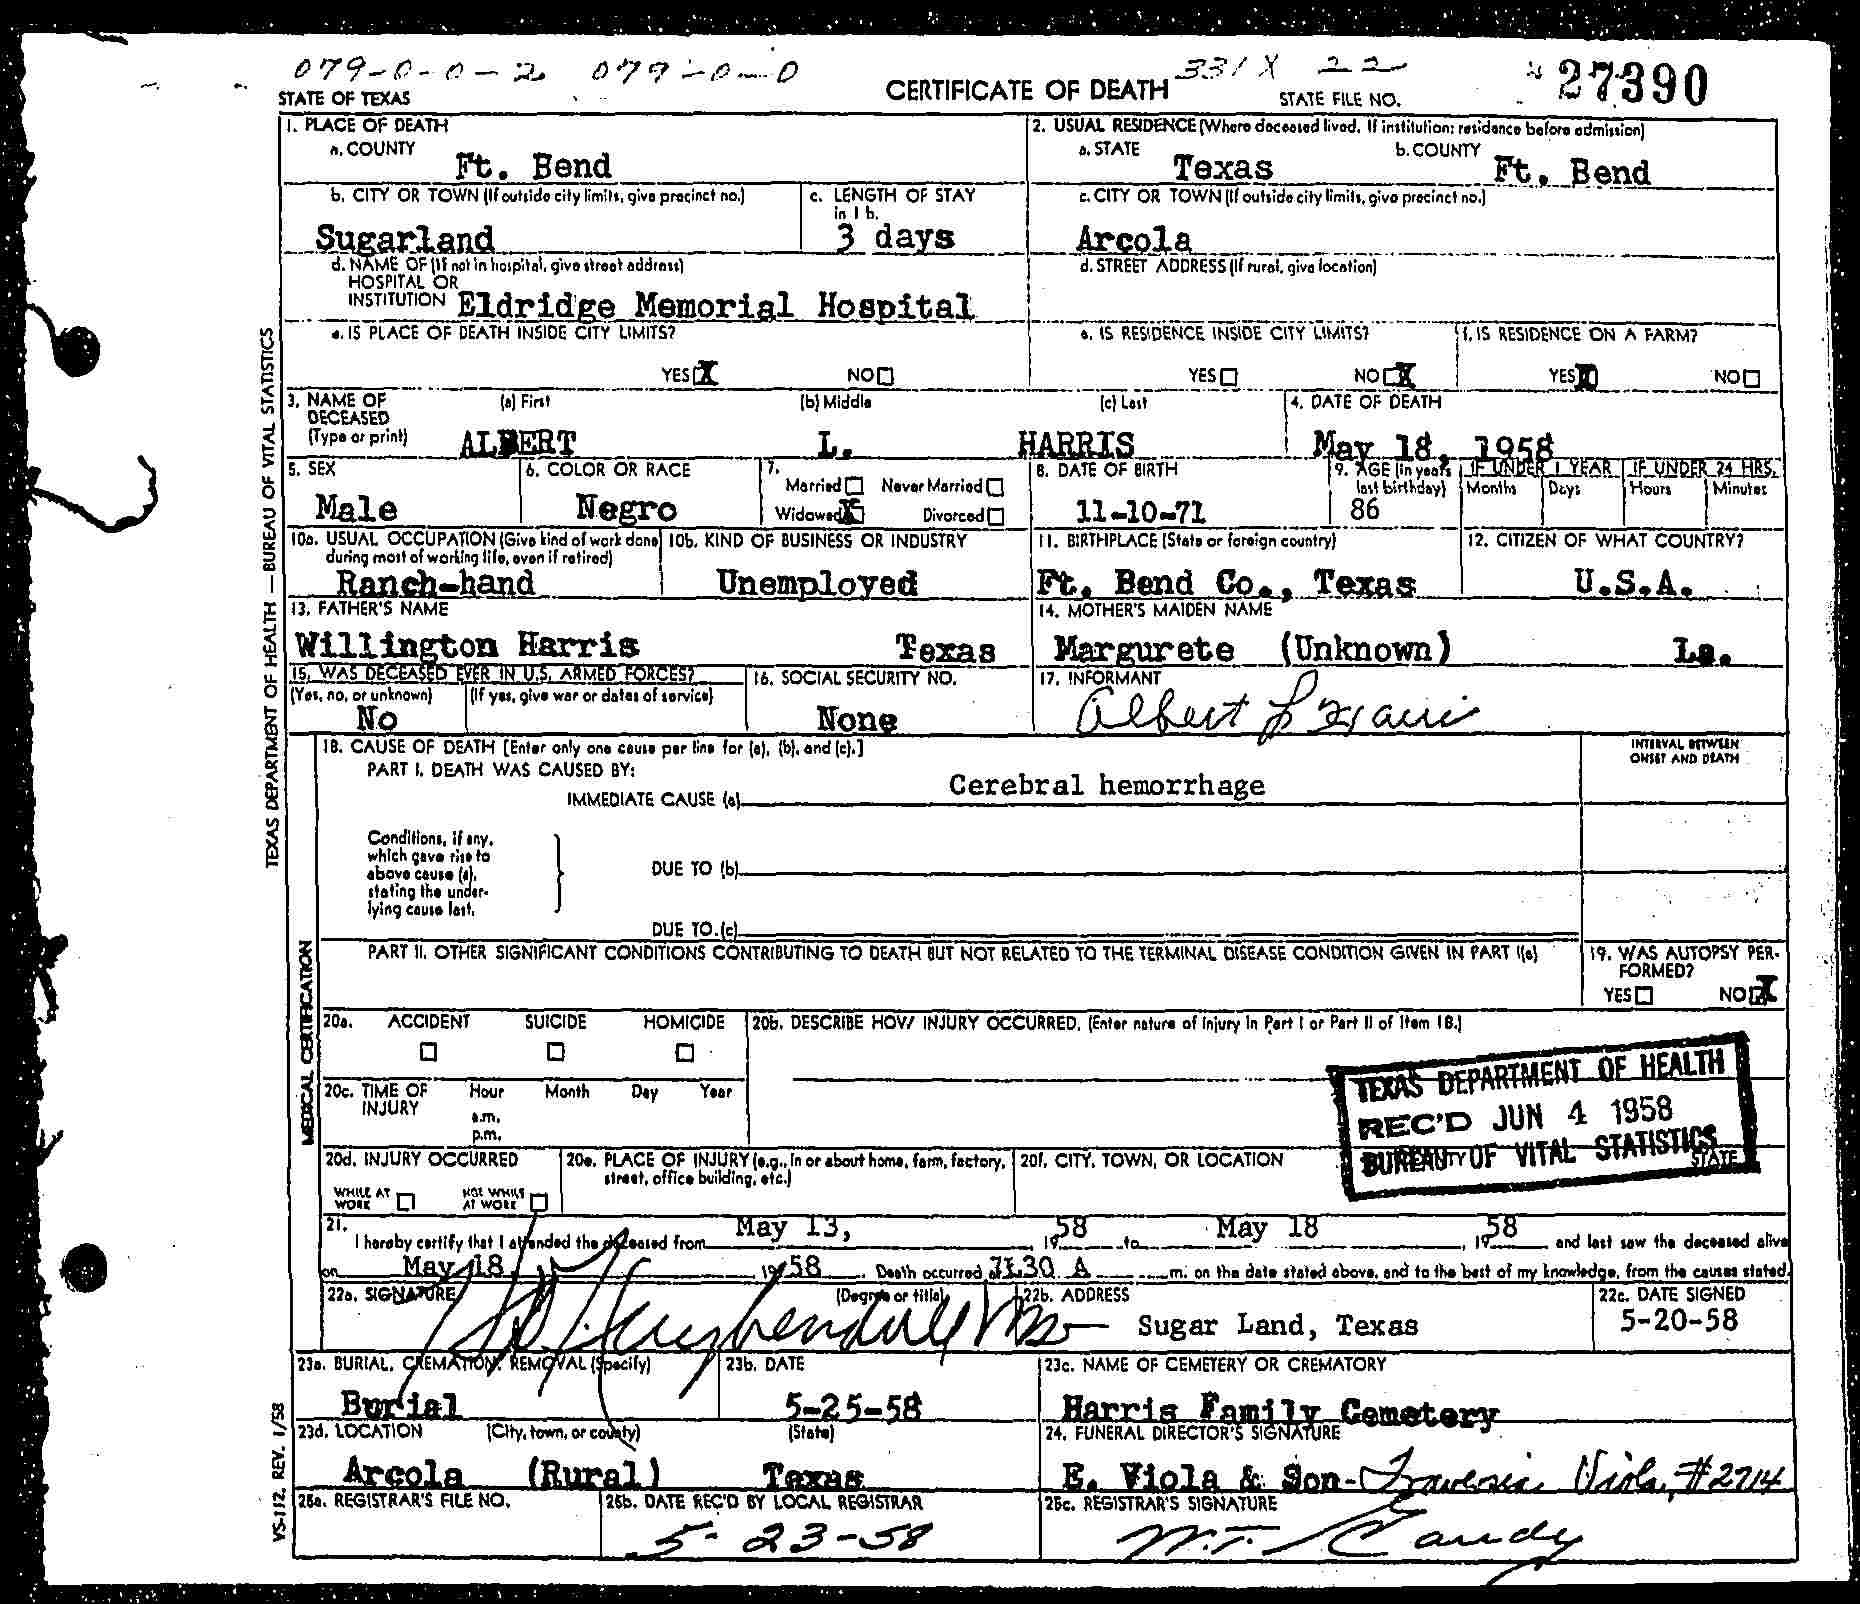 A death certificate of the grave uncovered by digging at the wrong location.